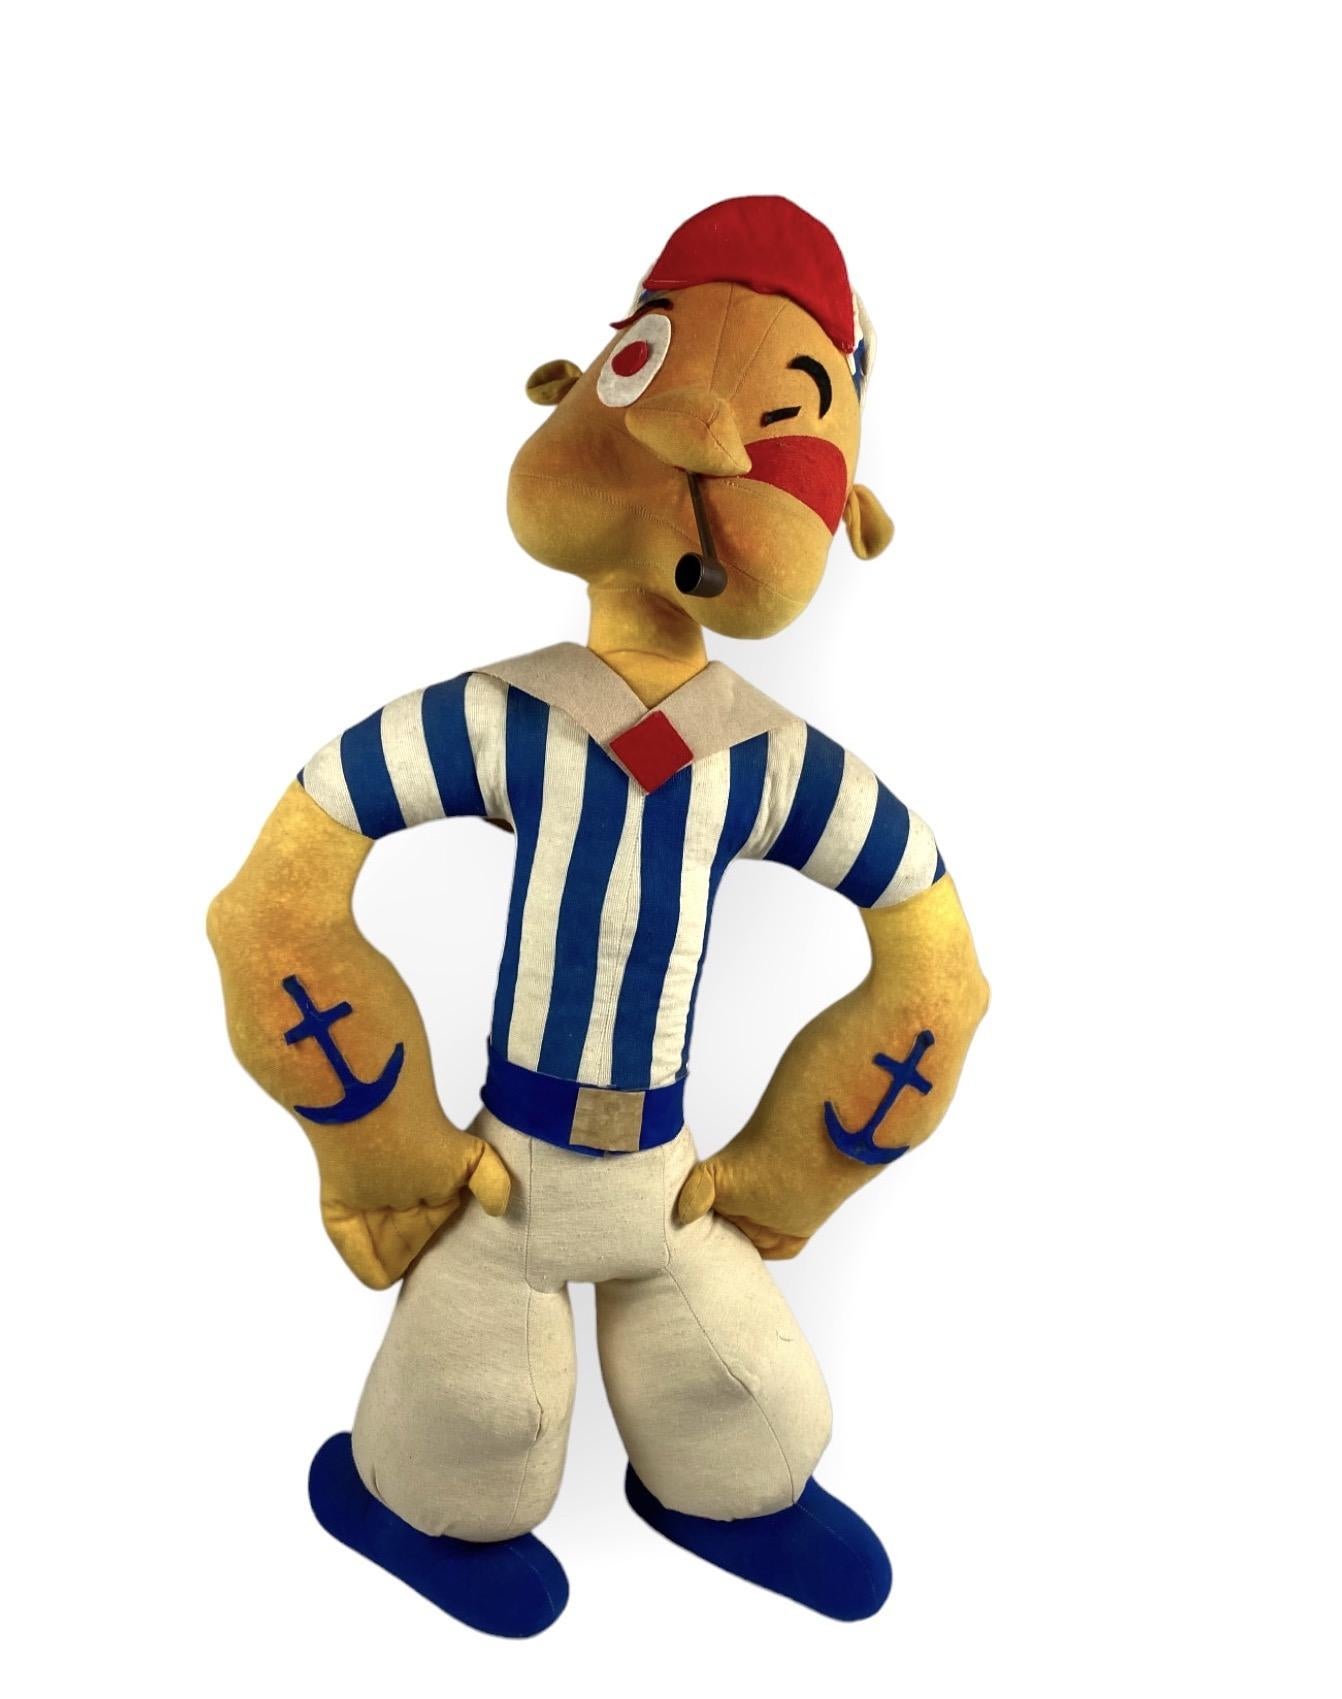 Popeye rare cloth rag doll 

USA 1950s

Cloth, sponge, plastic pipe

H 100 cm - 56 x 30 cm

Conditions: overall good conditions consistent with age and use